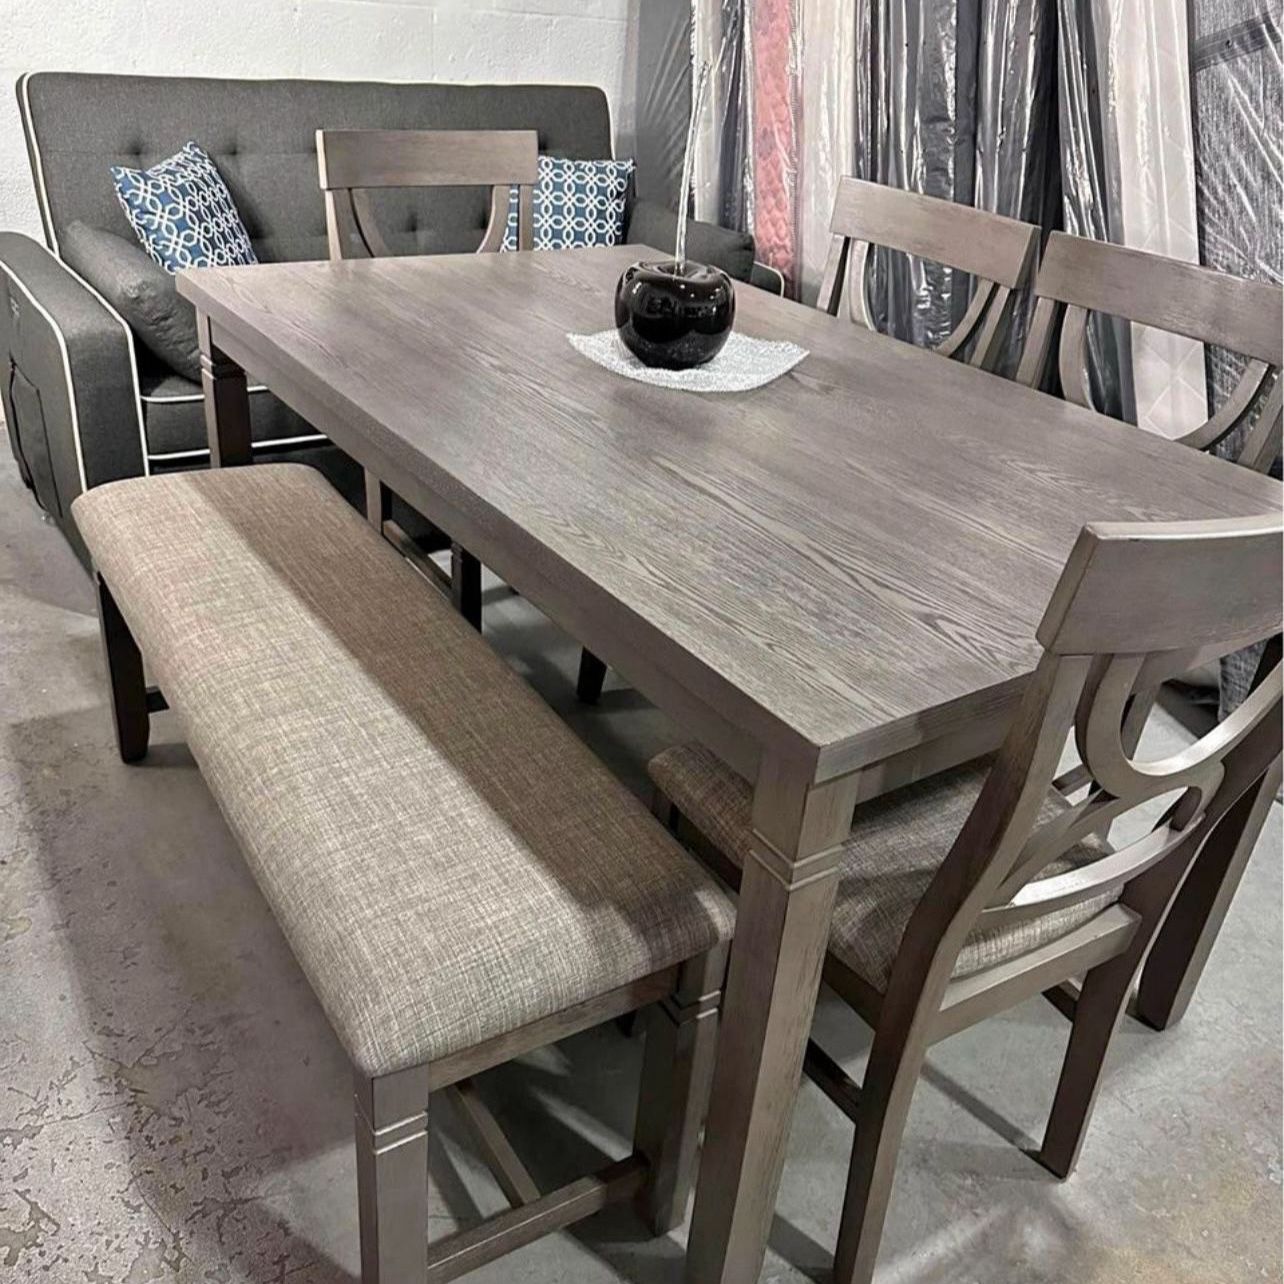 Brand new Dining sets in box- Flexible payment options available $39 down. (Message for details) 